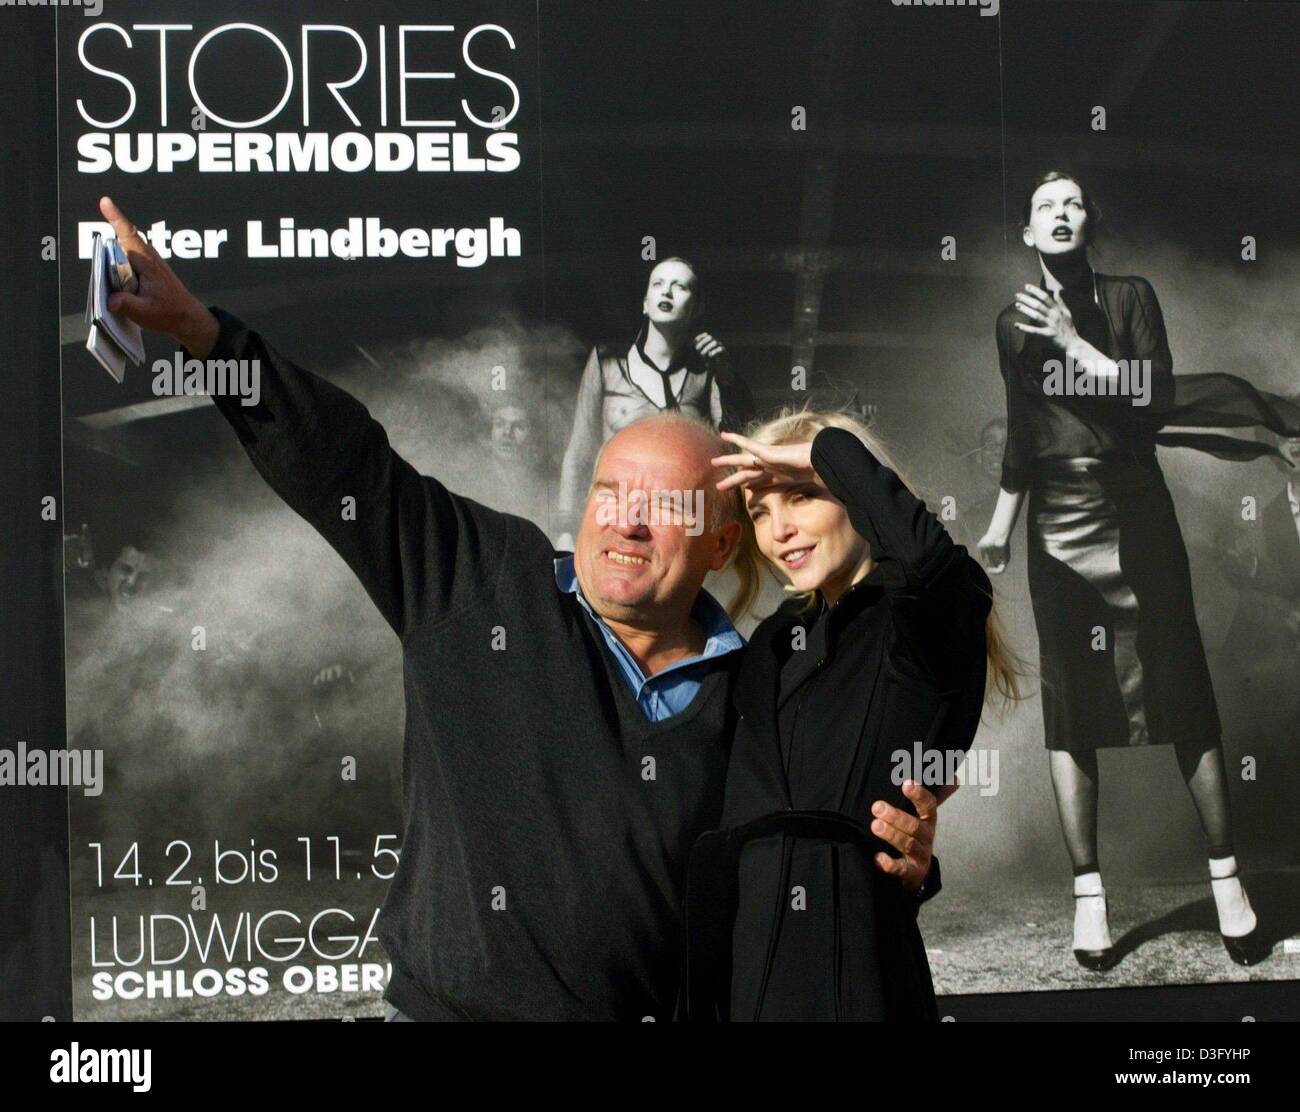 (dpa) - German star photographer Peter Lindbergh and model Nadja Auermann stand in front of a poster advertising Peter Lindbergh's exhibition 'Stories - Supermodels', in Oberhausen, Germany, 13 February 2003. The exhibition is open from 14 February until 11 May 2003. Centre of the exhibition is the series 'Invasion' which consists of 24 scurrile fashion photographs. Stock Photo